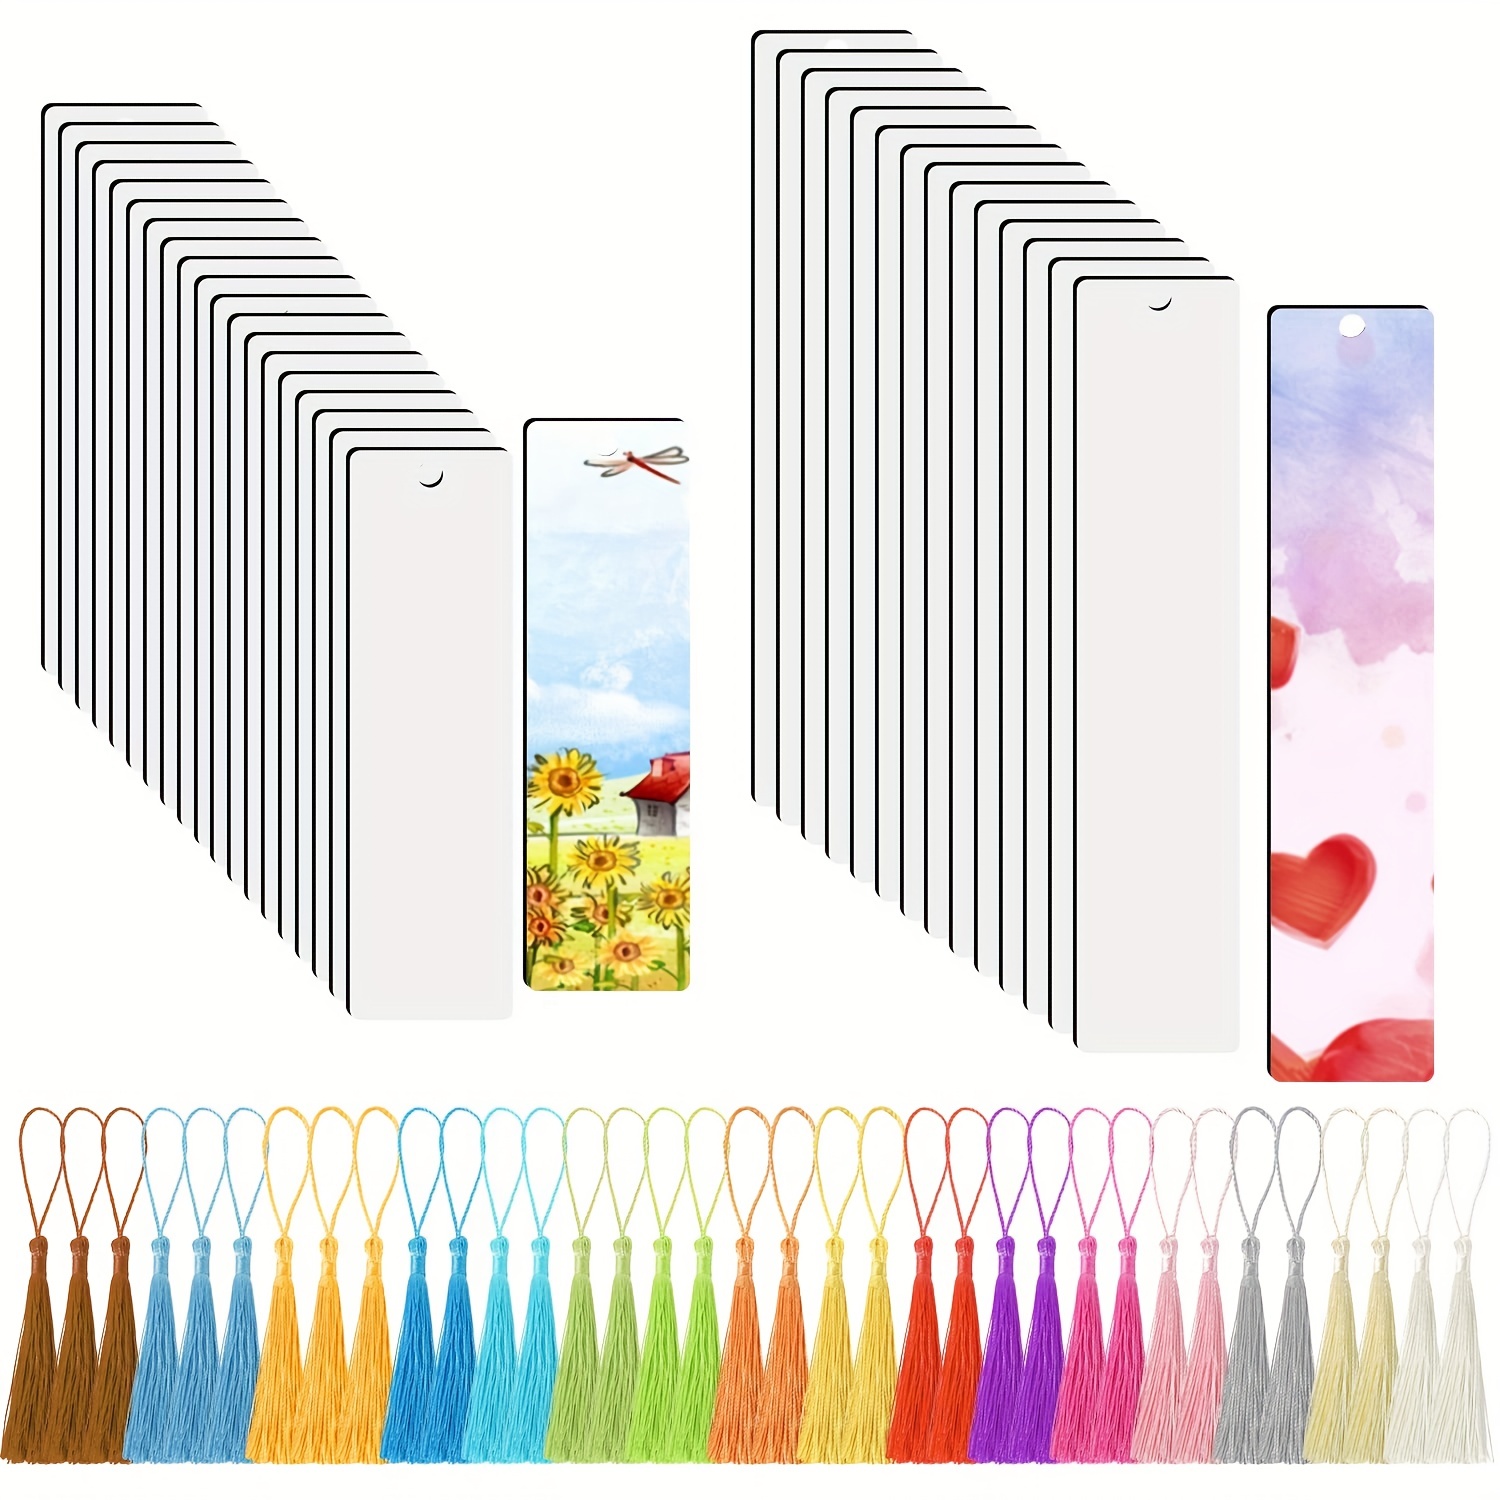 50 Pcs Sublimation Bookmark Blank Heat Transfer Aluminum Metal Bookmarks Bulk DIY Bookmarks with Hole and Colorful Tassels for Crafts,Personalized